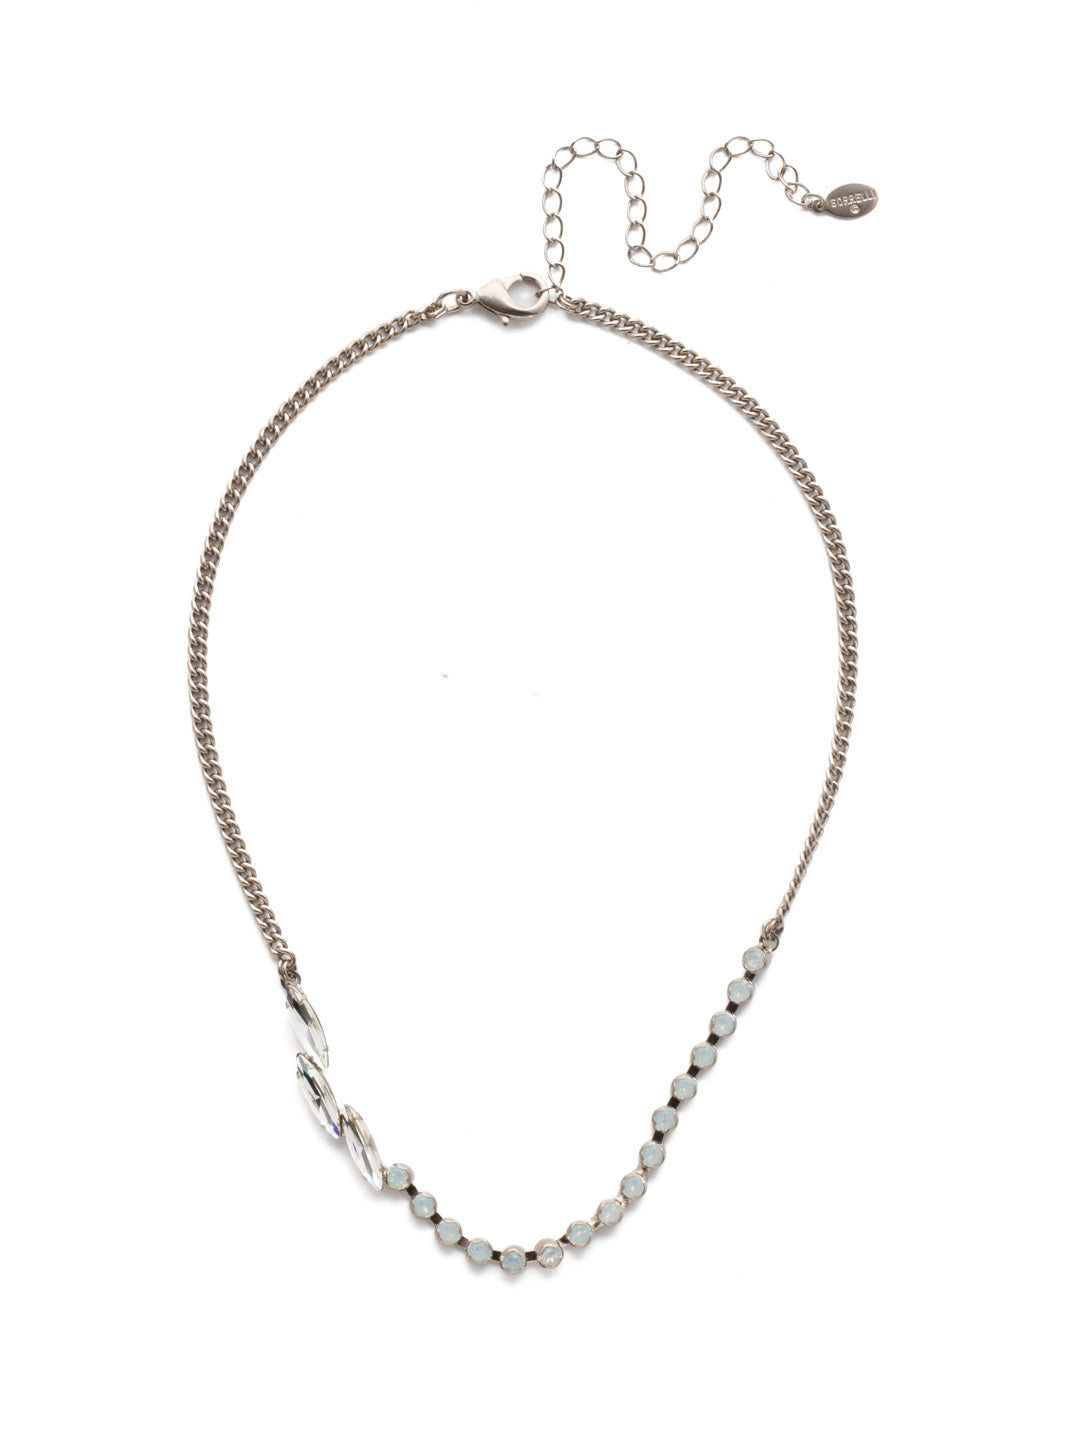 Isabella Classic Necklace - NEF46ASGLC - <p>Multicolored crystals sparkle on this box chain necklace which can make an elegant addition to any look. Complete with a lobster claw clasp making it easily adjustable to fit your desired neckline. From Sorrelli's Glacier collection in our Antique Silver-tone finish.</p>